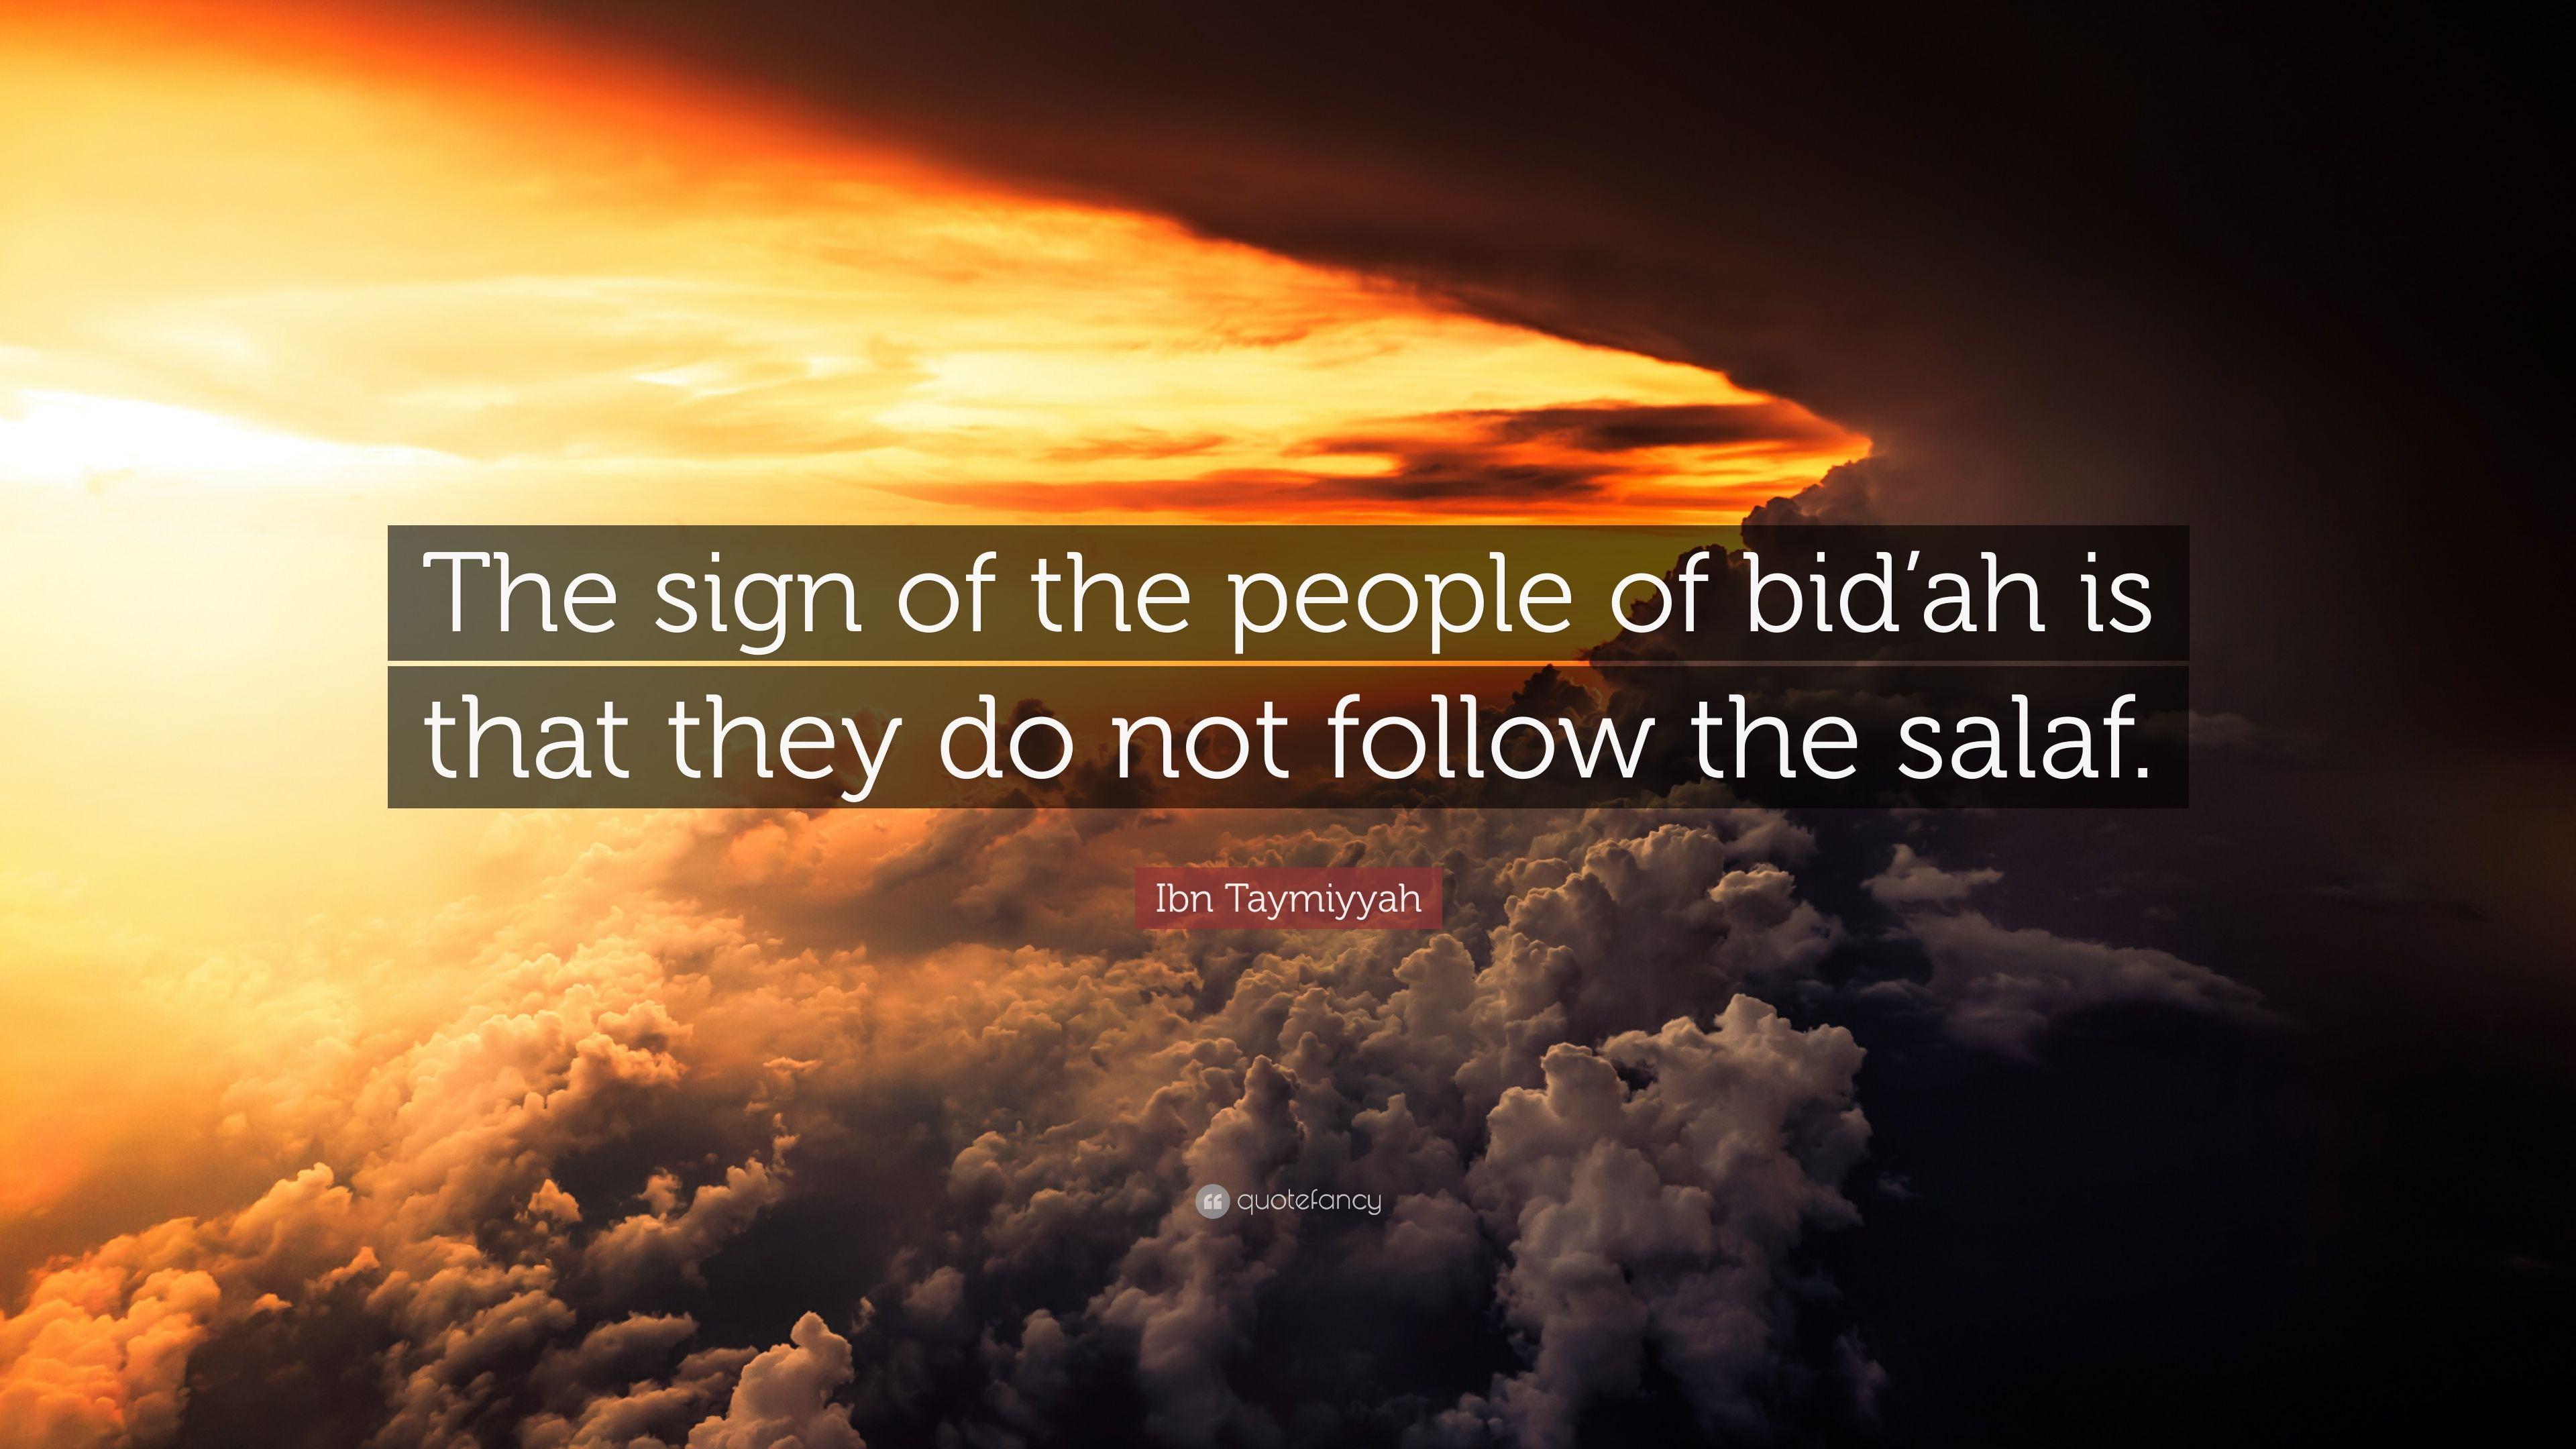 Ibn Taymiyyah Quote: “The sign of the people of bid'ah is that they